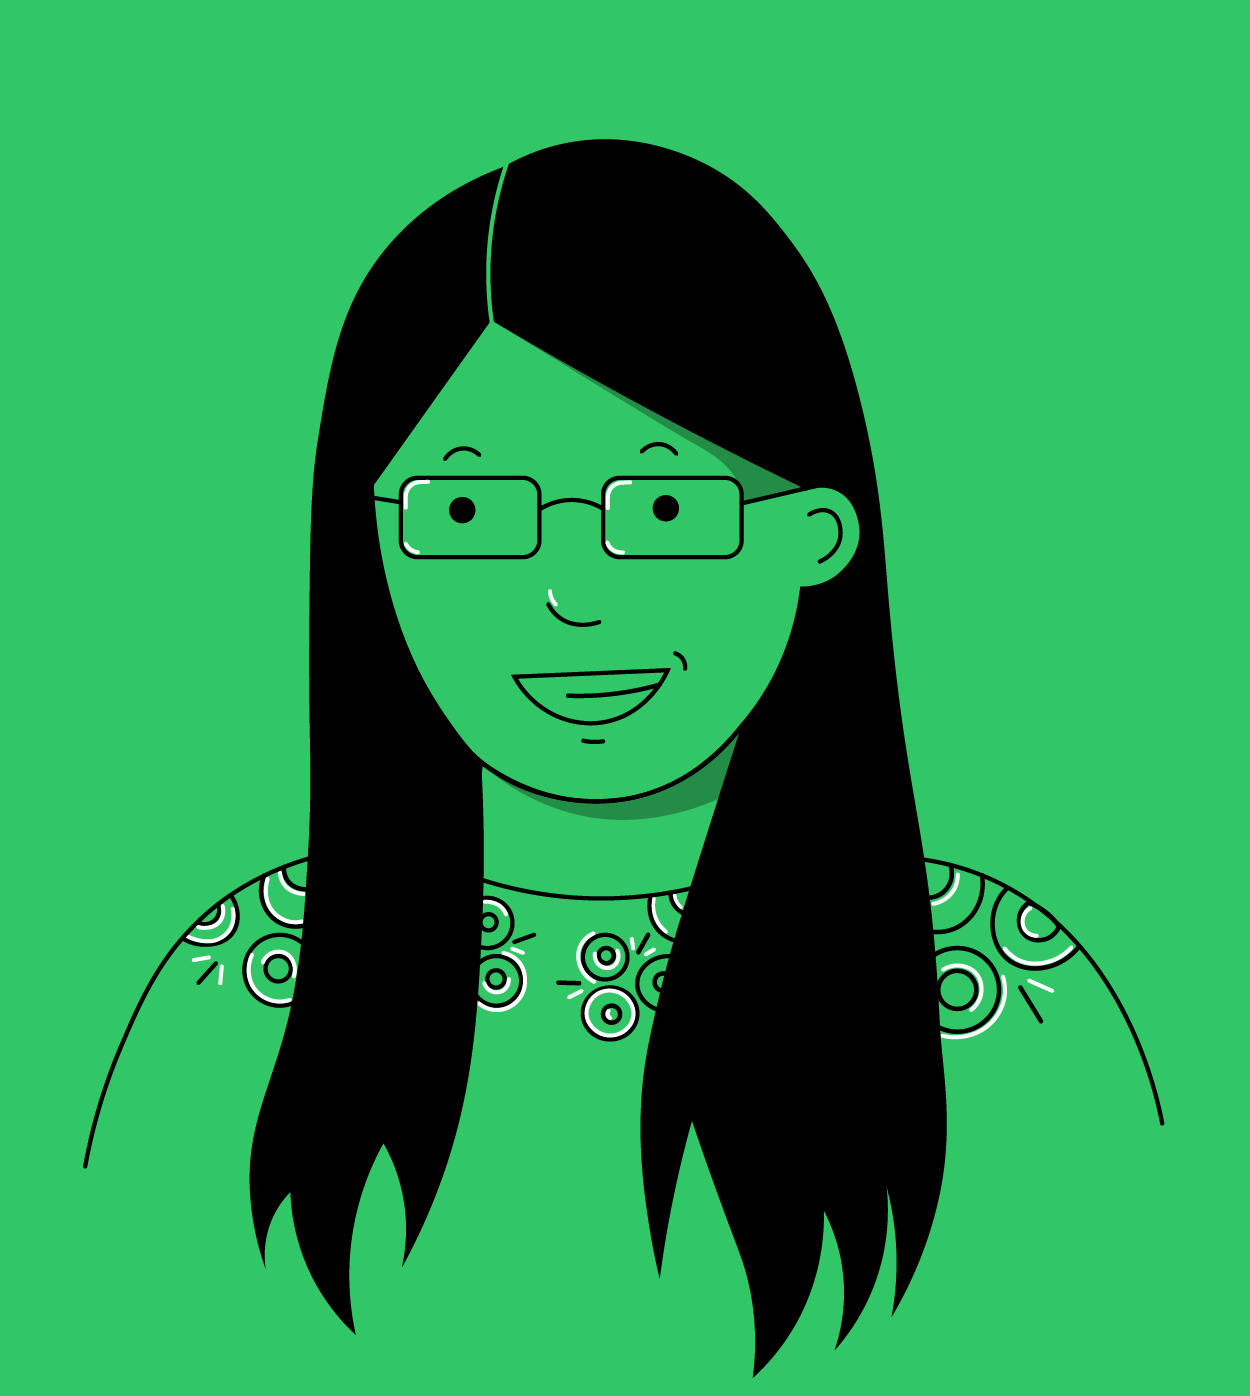 Illustration of a headshot of a smiling girl wearing glasses, and a top with 